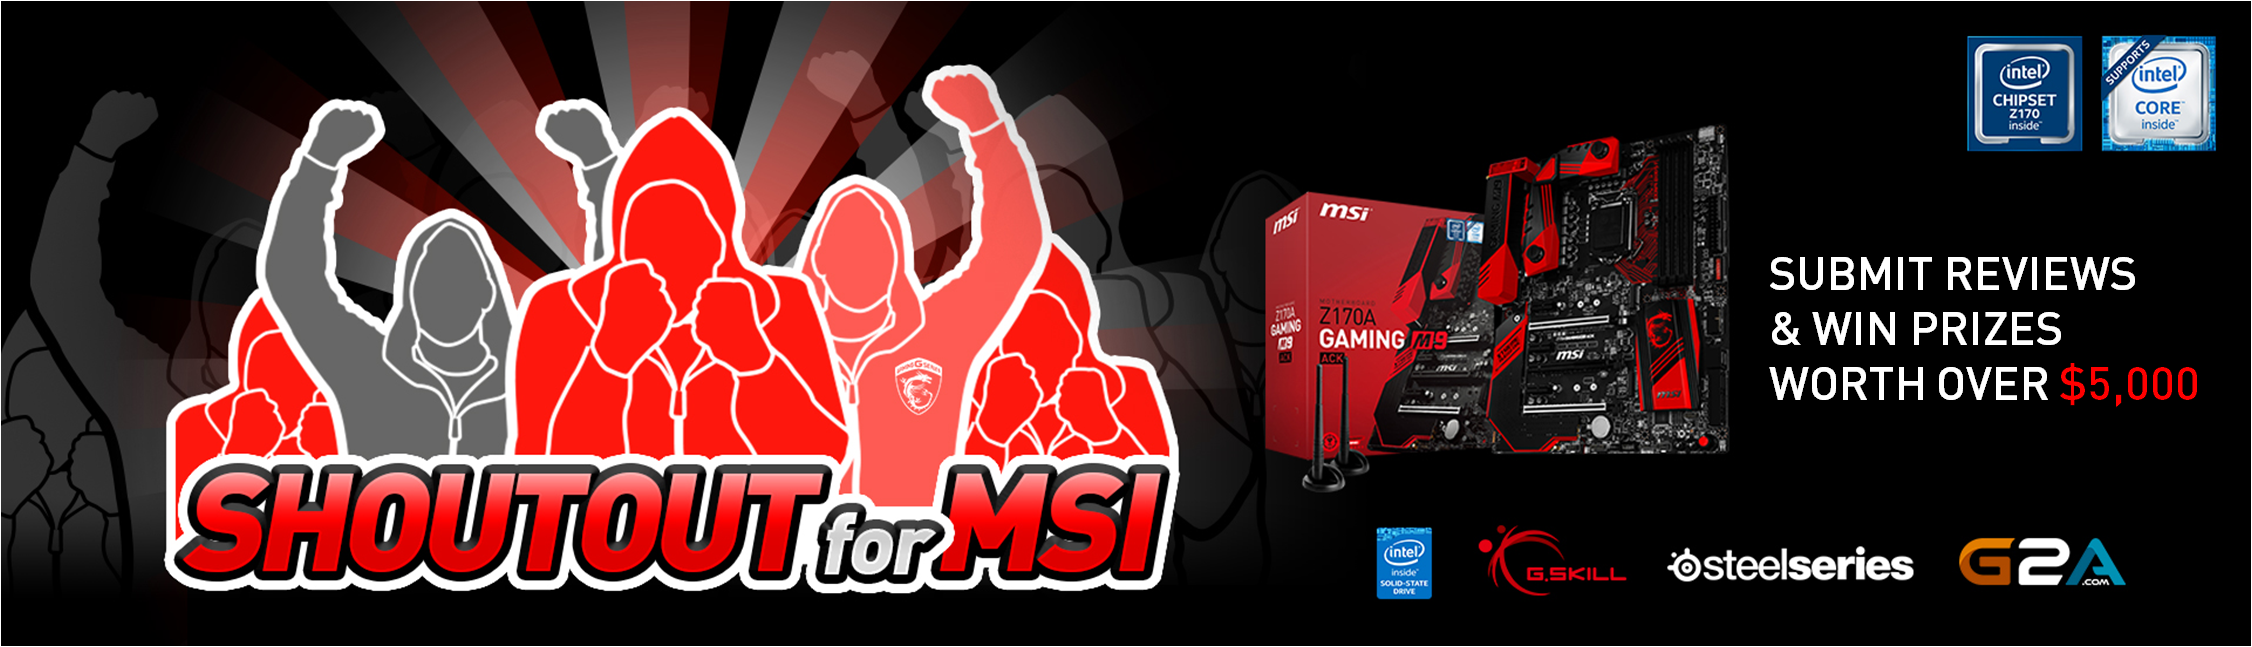 SHOUT OUT for MSI Online Campaign.png